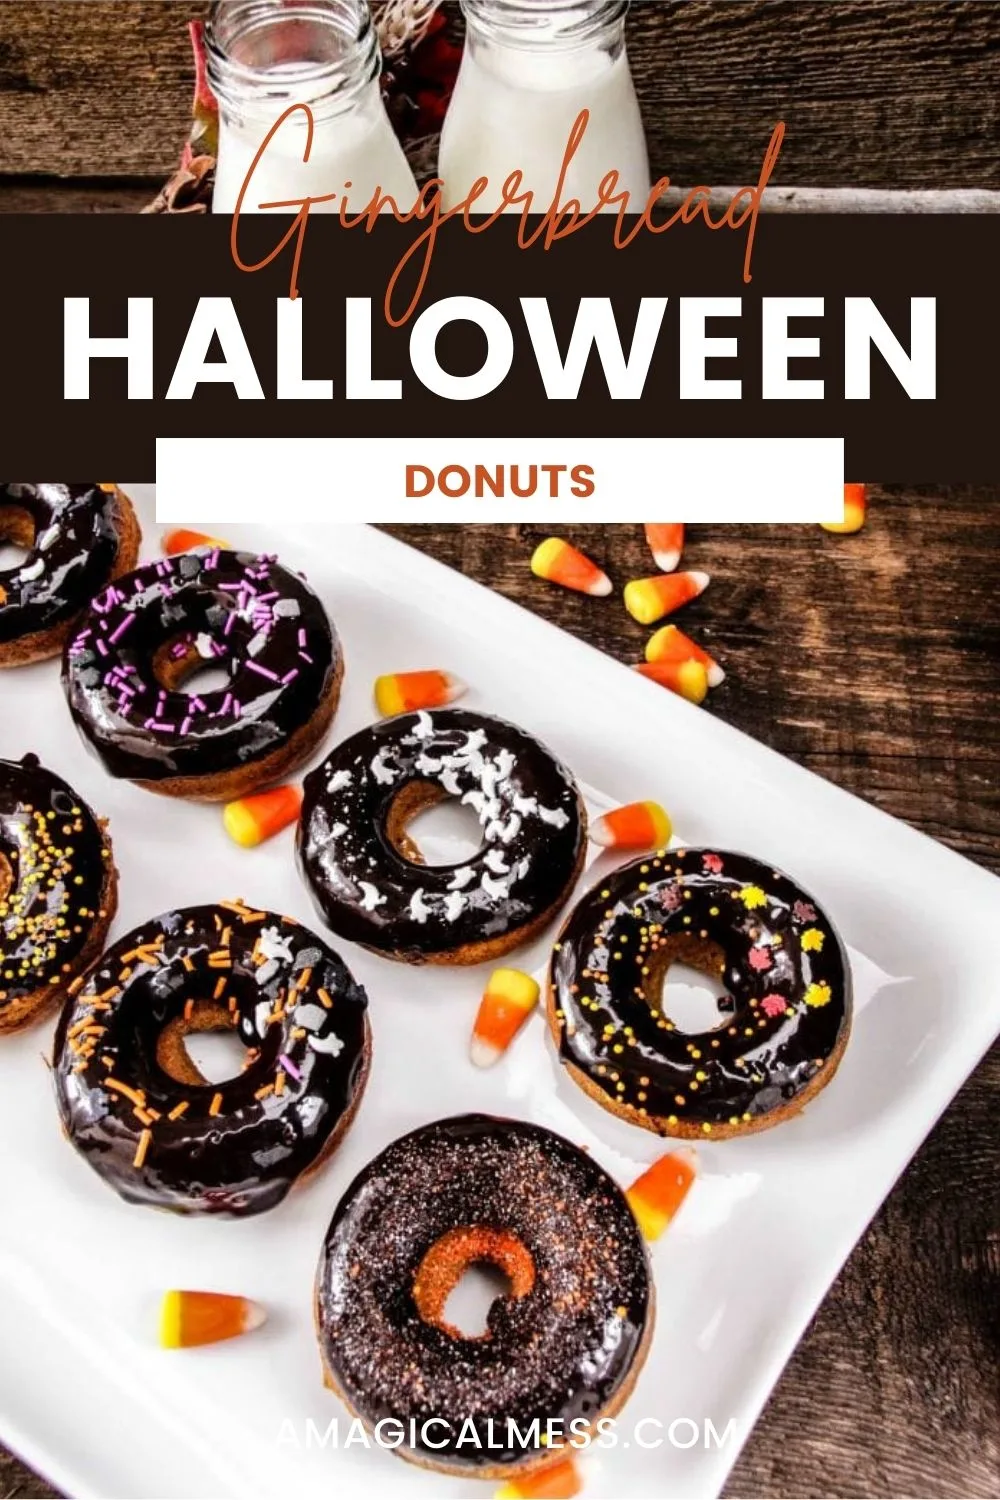 Dark chocolate donuts with halloween sprinkles on a plate.